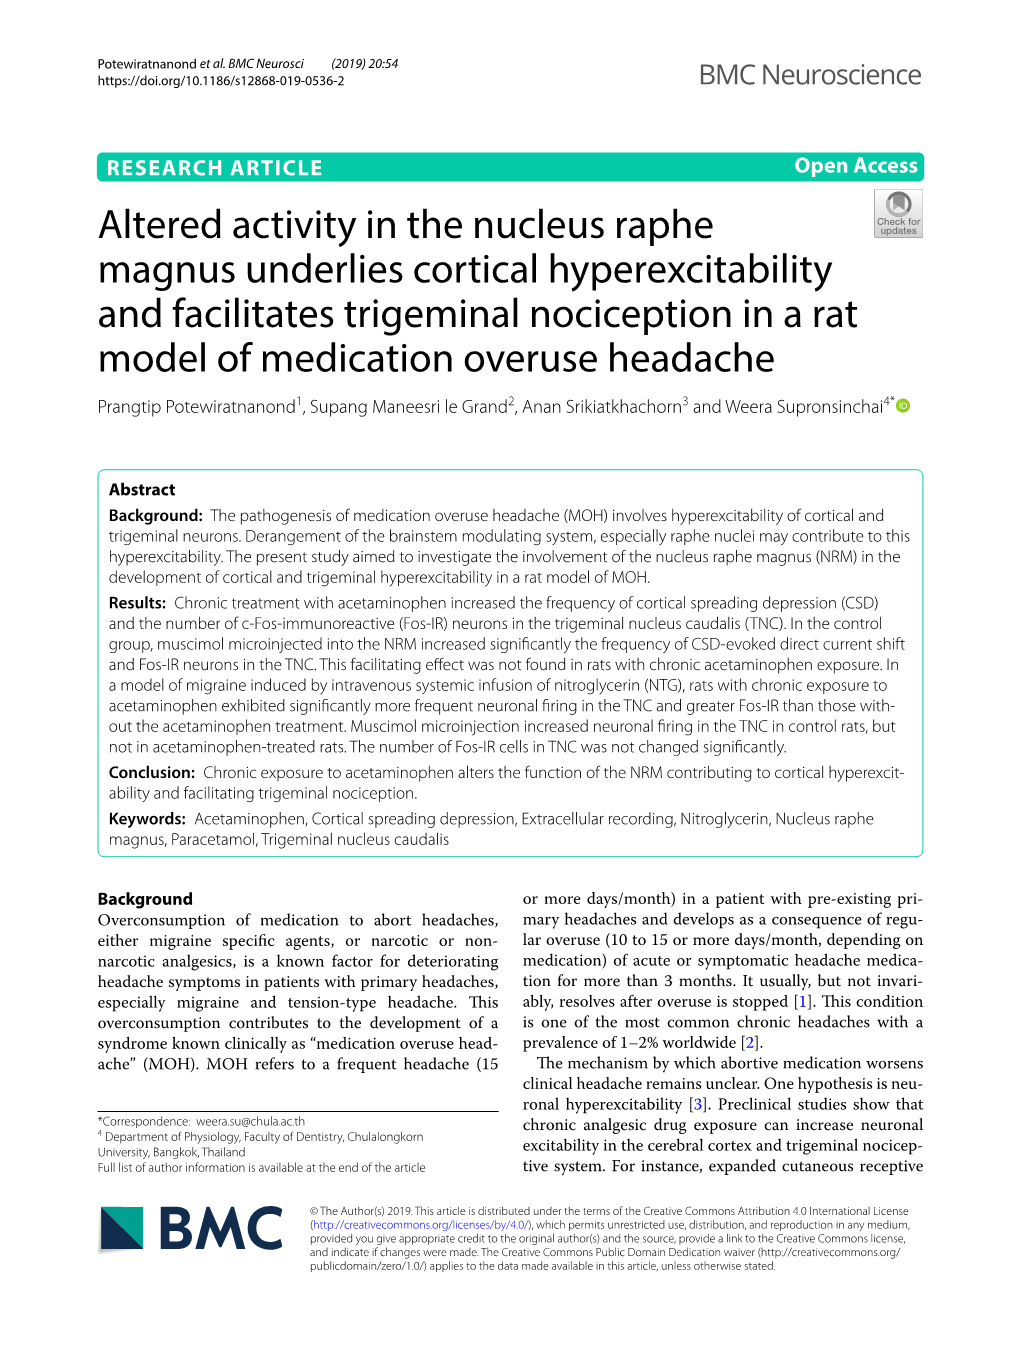 Altered Activity in the Nucleus Raphe Magnus Underlies Cortical Hyperexcitability and Facilitates Trigeminal Nociception in a Ra